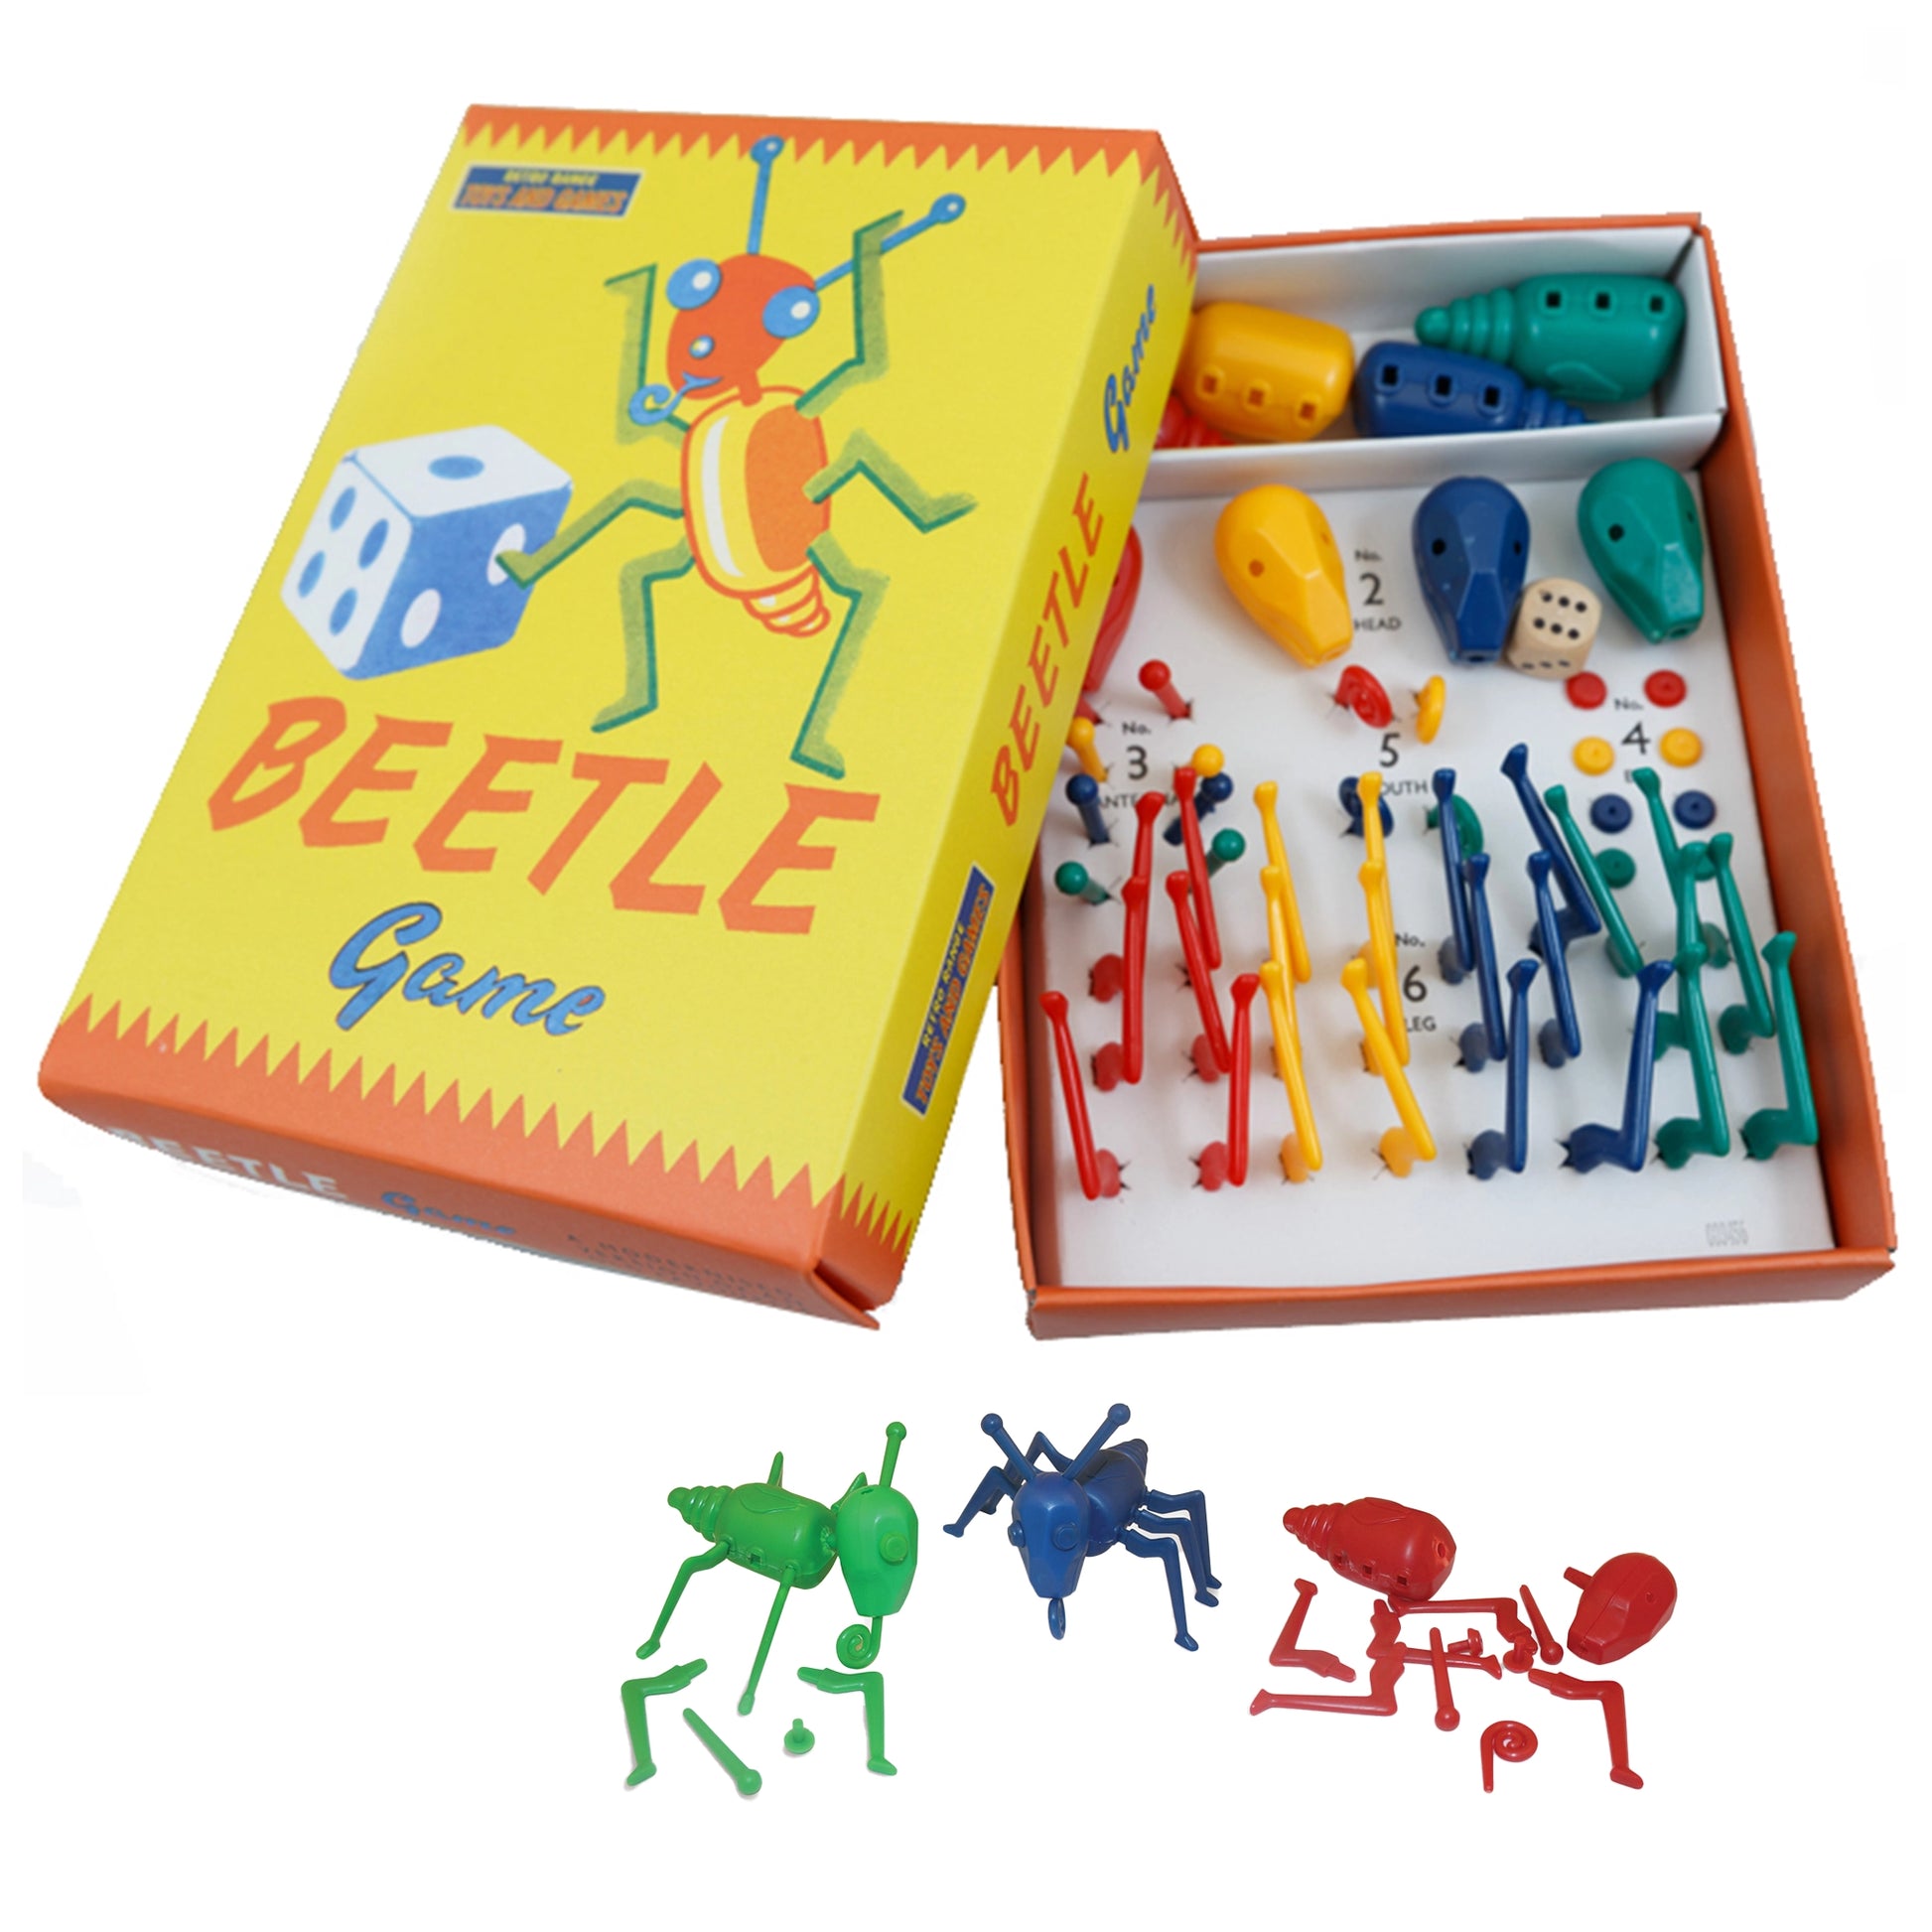 The Beetle Game - House of Marbles - The Forgotten Toy Shop